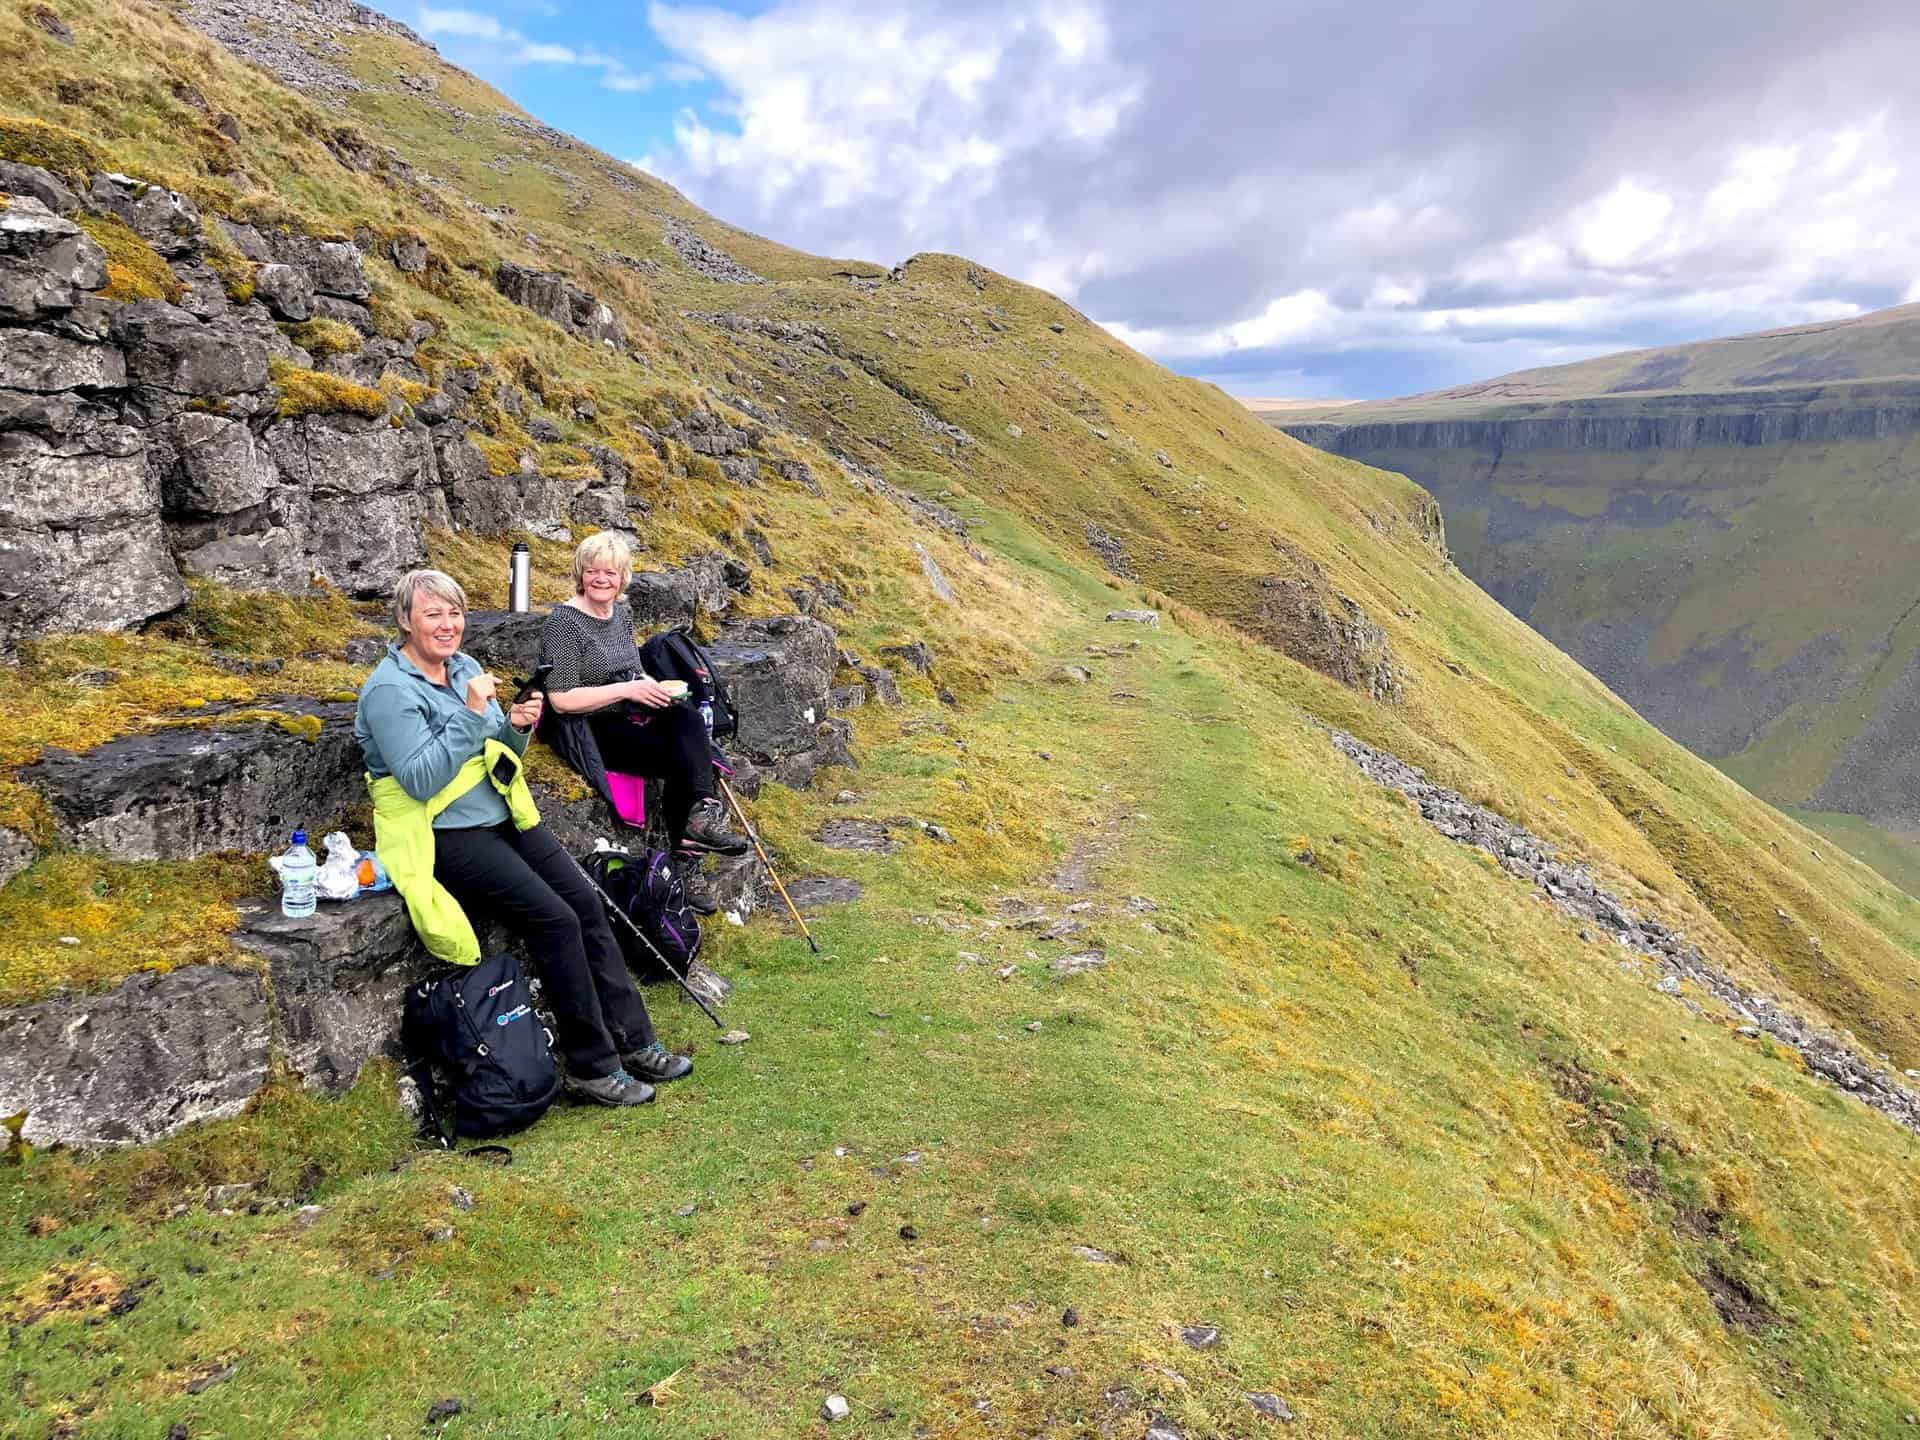 Lunch beside Narrow Gate, the path above the northern slopes of High Cup Gill.